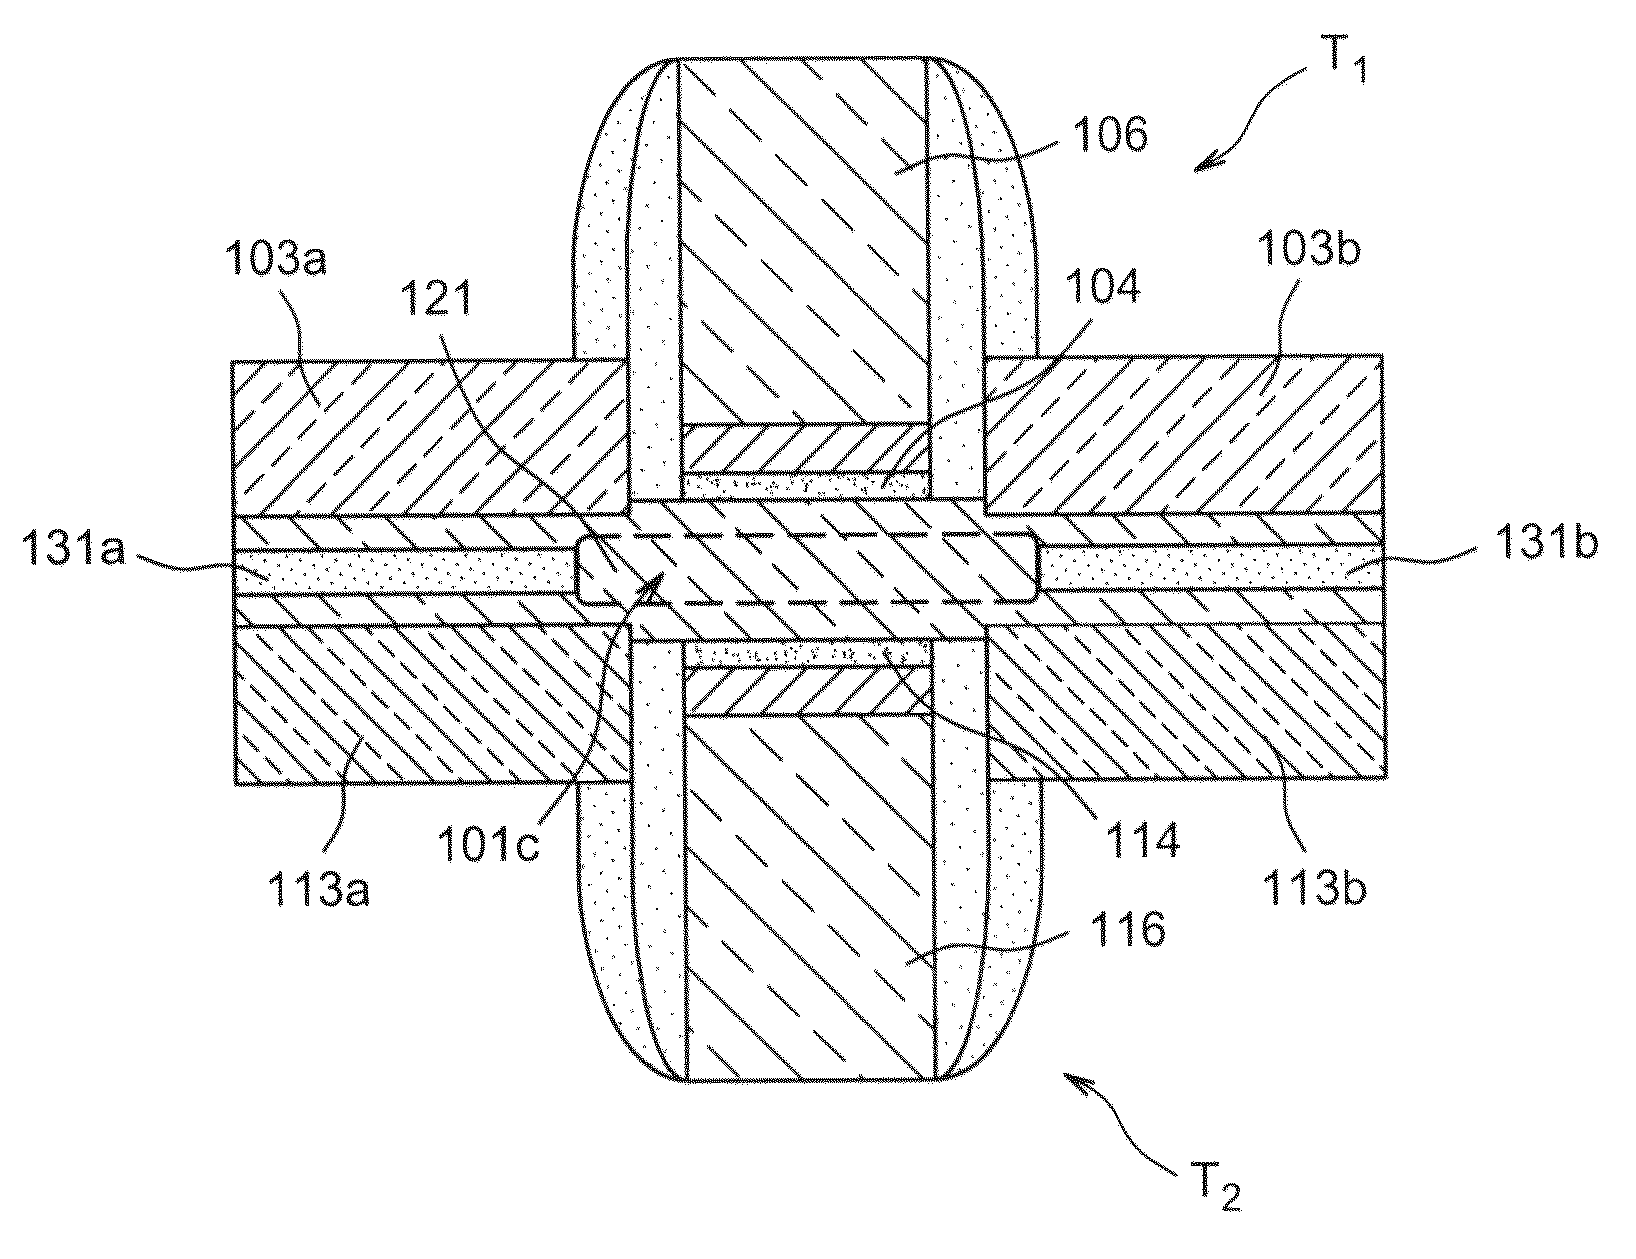 Light-emitting device with head-to-tail P-type and N-type transistors